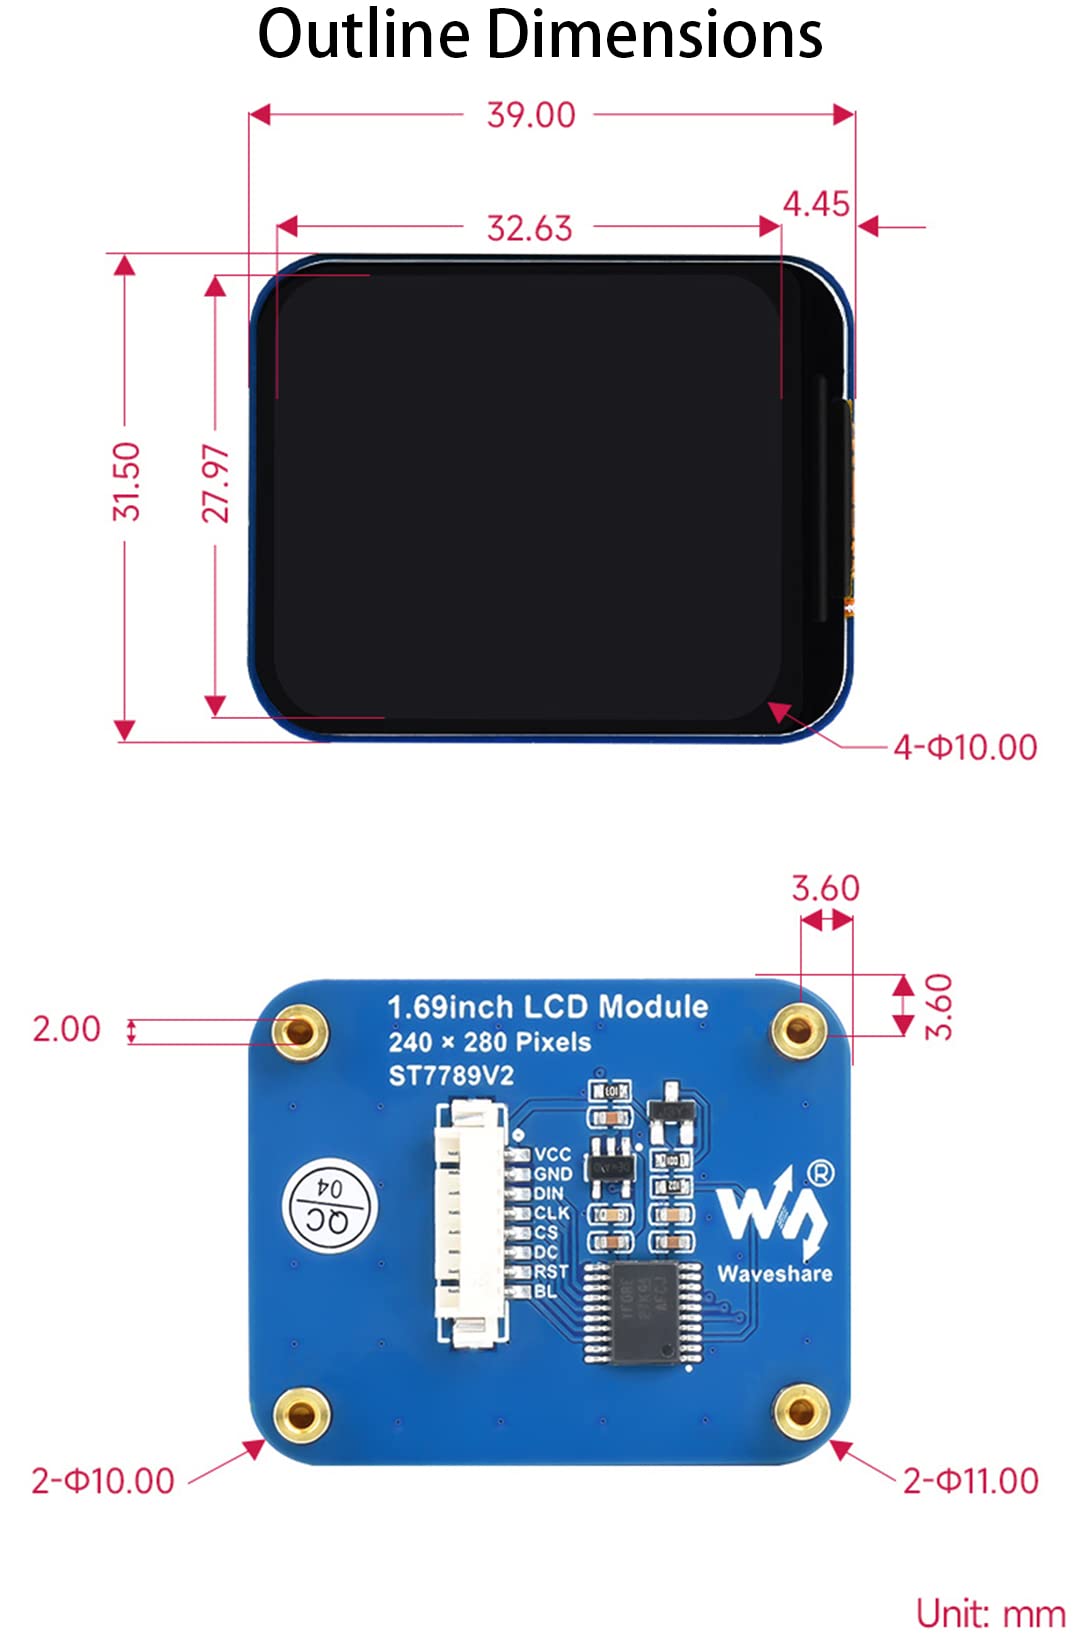 waveshare 1.69inch LCD Display Module, 240×280 Resolution IPS Screen Display 262K Display Color ST7789V2 Driver chip SPI Interface, for Raspberry Pi, Arduino, STM32, etc.